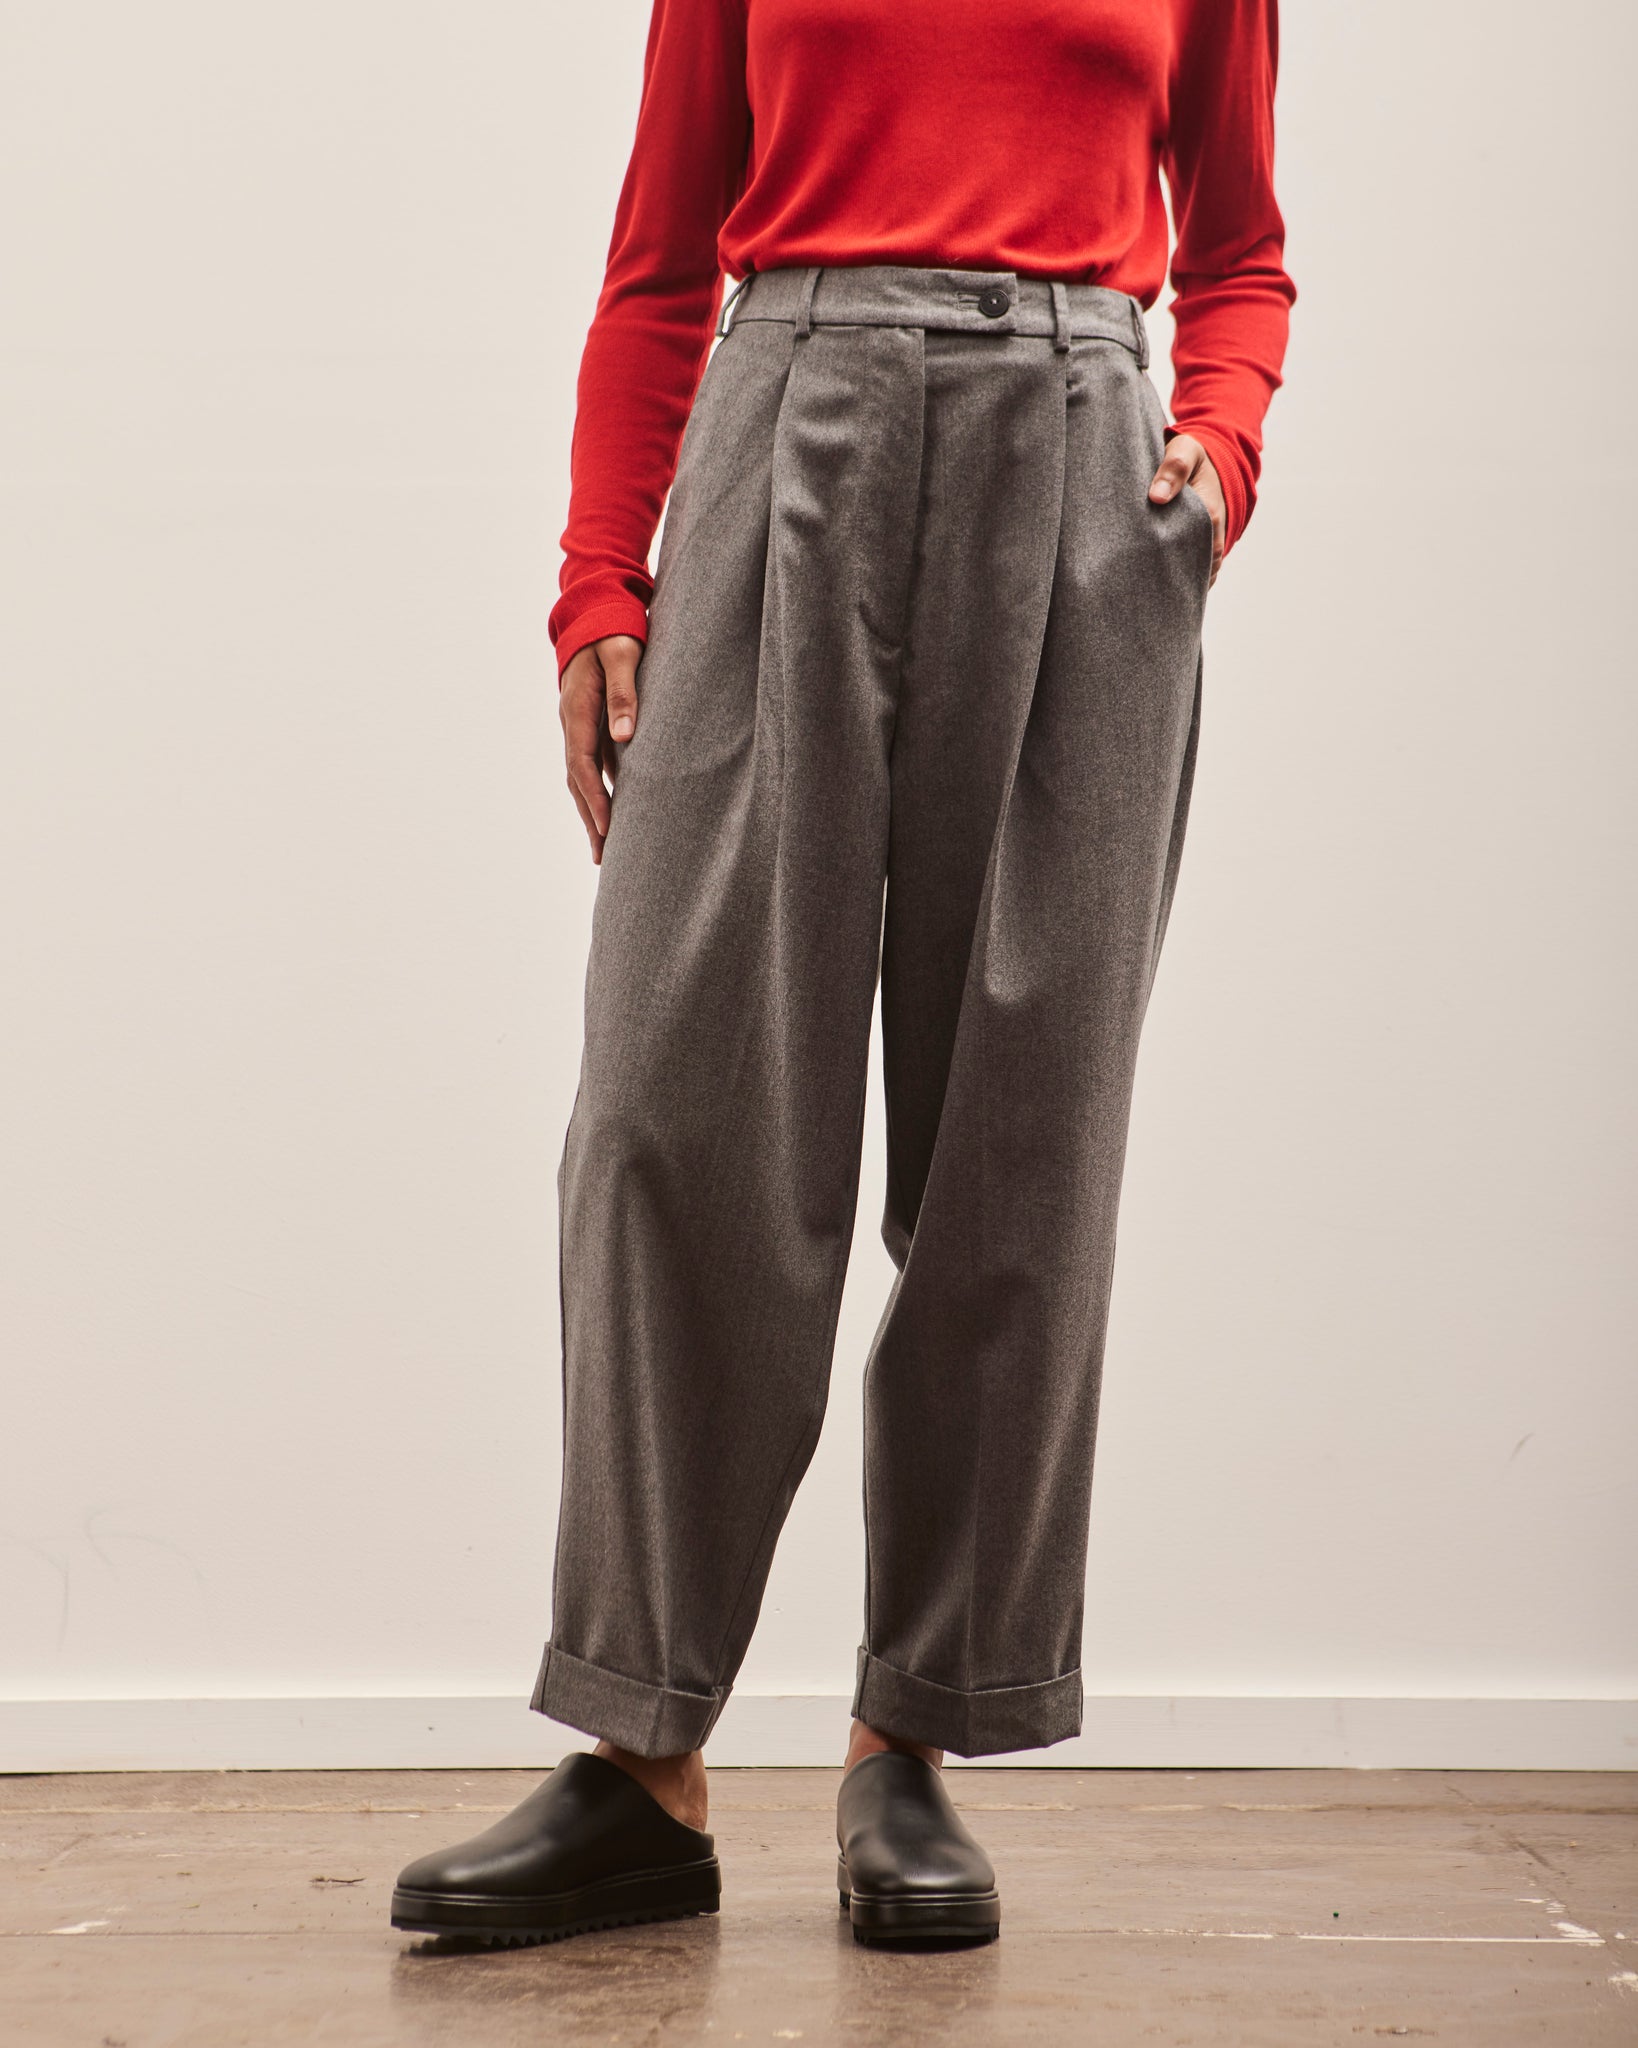 Masculine trousers